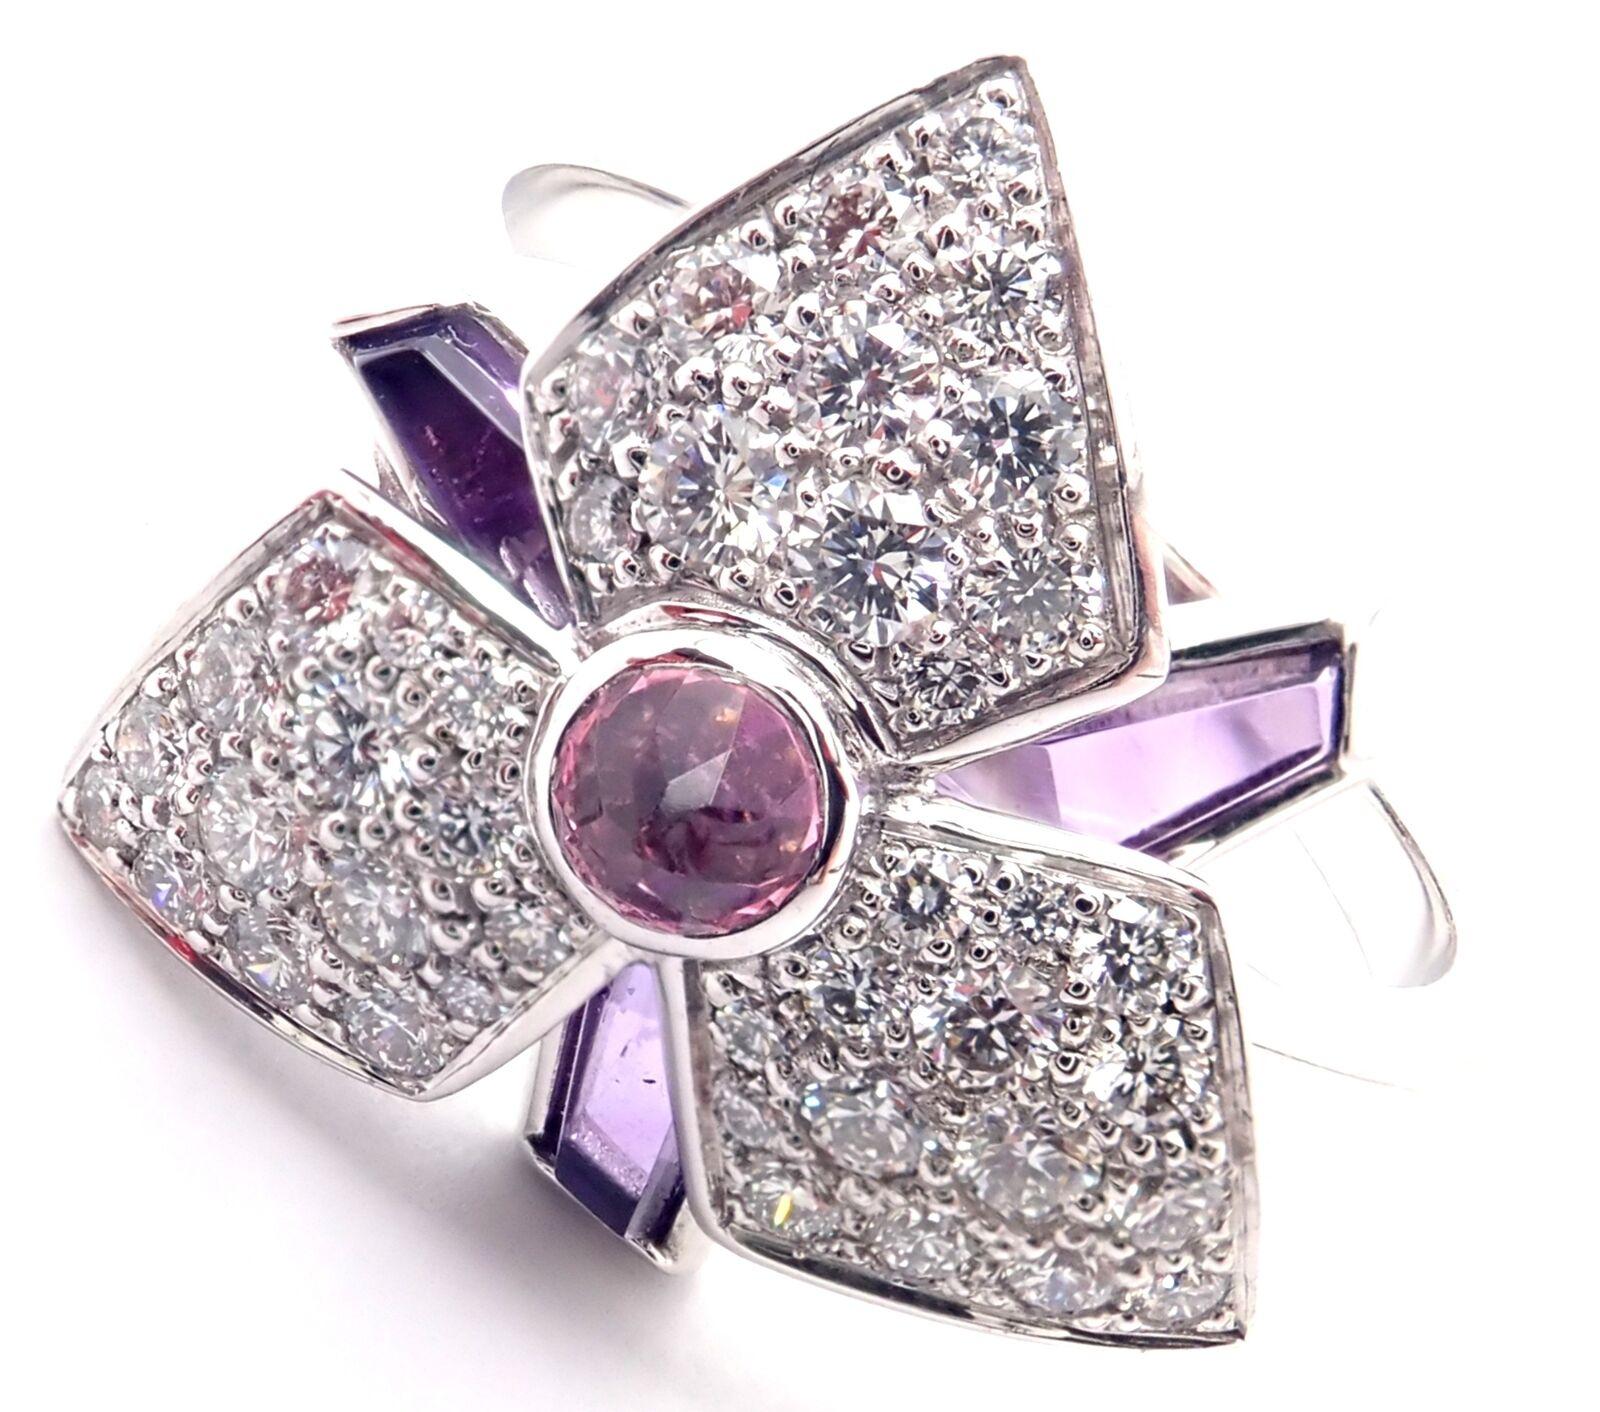 18k White Gold Diamond Amethyst Caresse D'orchidées Orchid Flower Ring by Cartier.
With Round brilliant cut diamonds VS1 clarity, E color total weight approx. .52ct
Amethysts
Details:
Size: European 55, US 7 1/4
Weight: 6.6 grams
Width: 